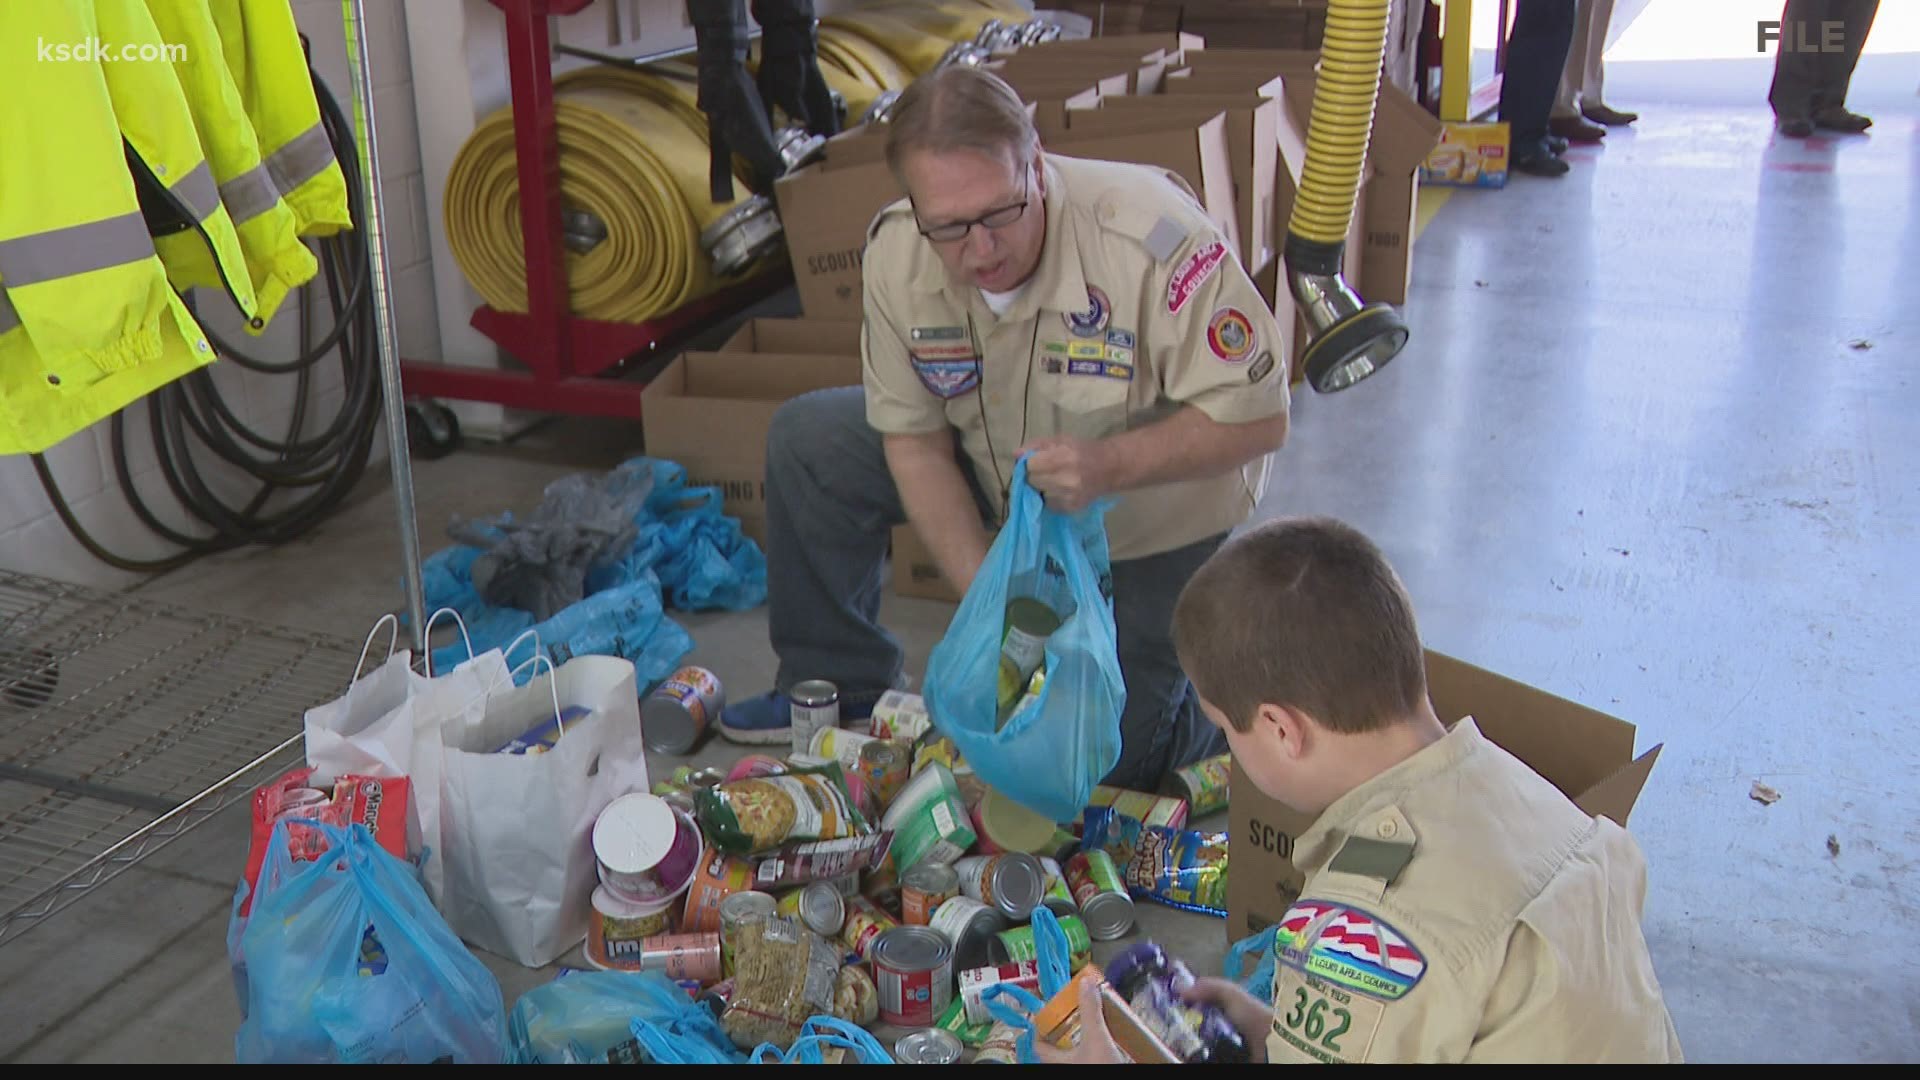 “The first way to give is text "scoutfood" to 91999 and those financial donations you can give as much as you see fit”